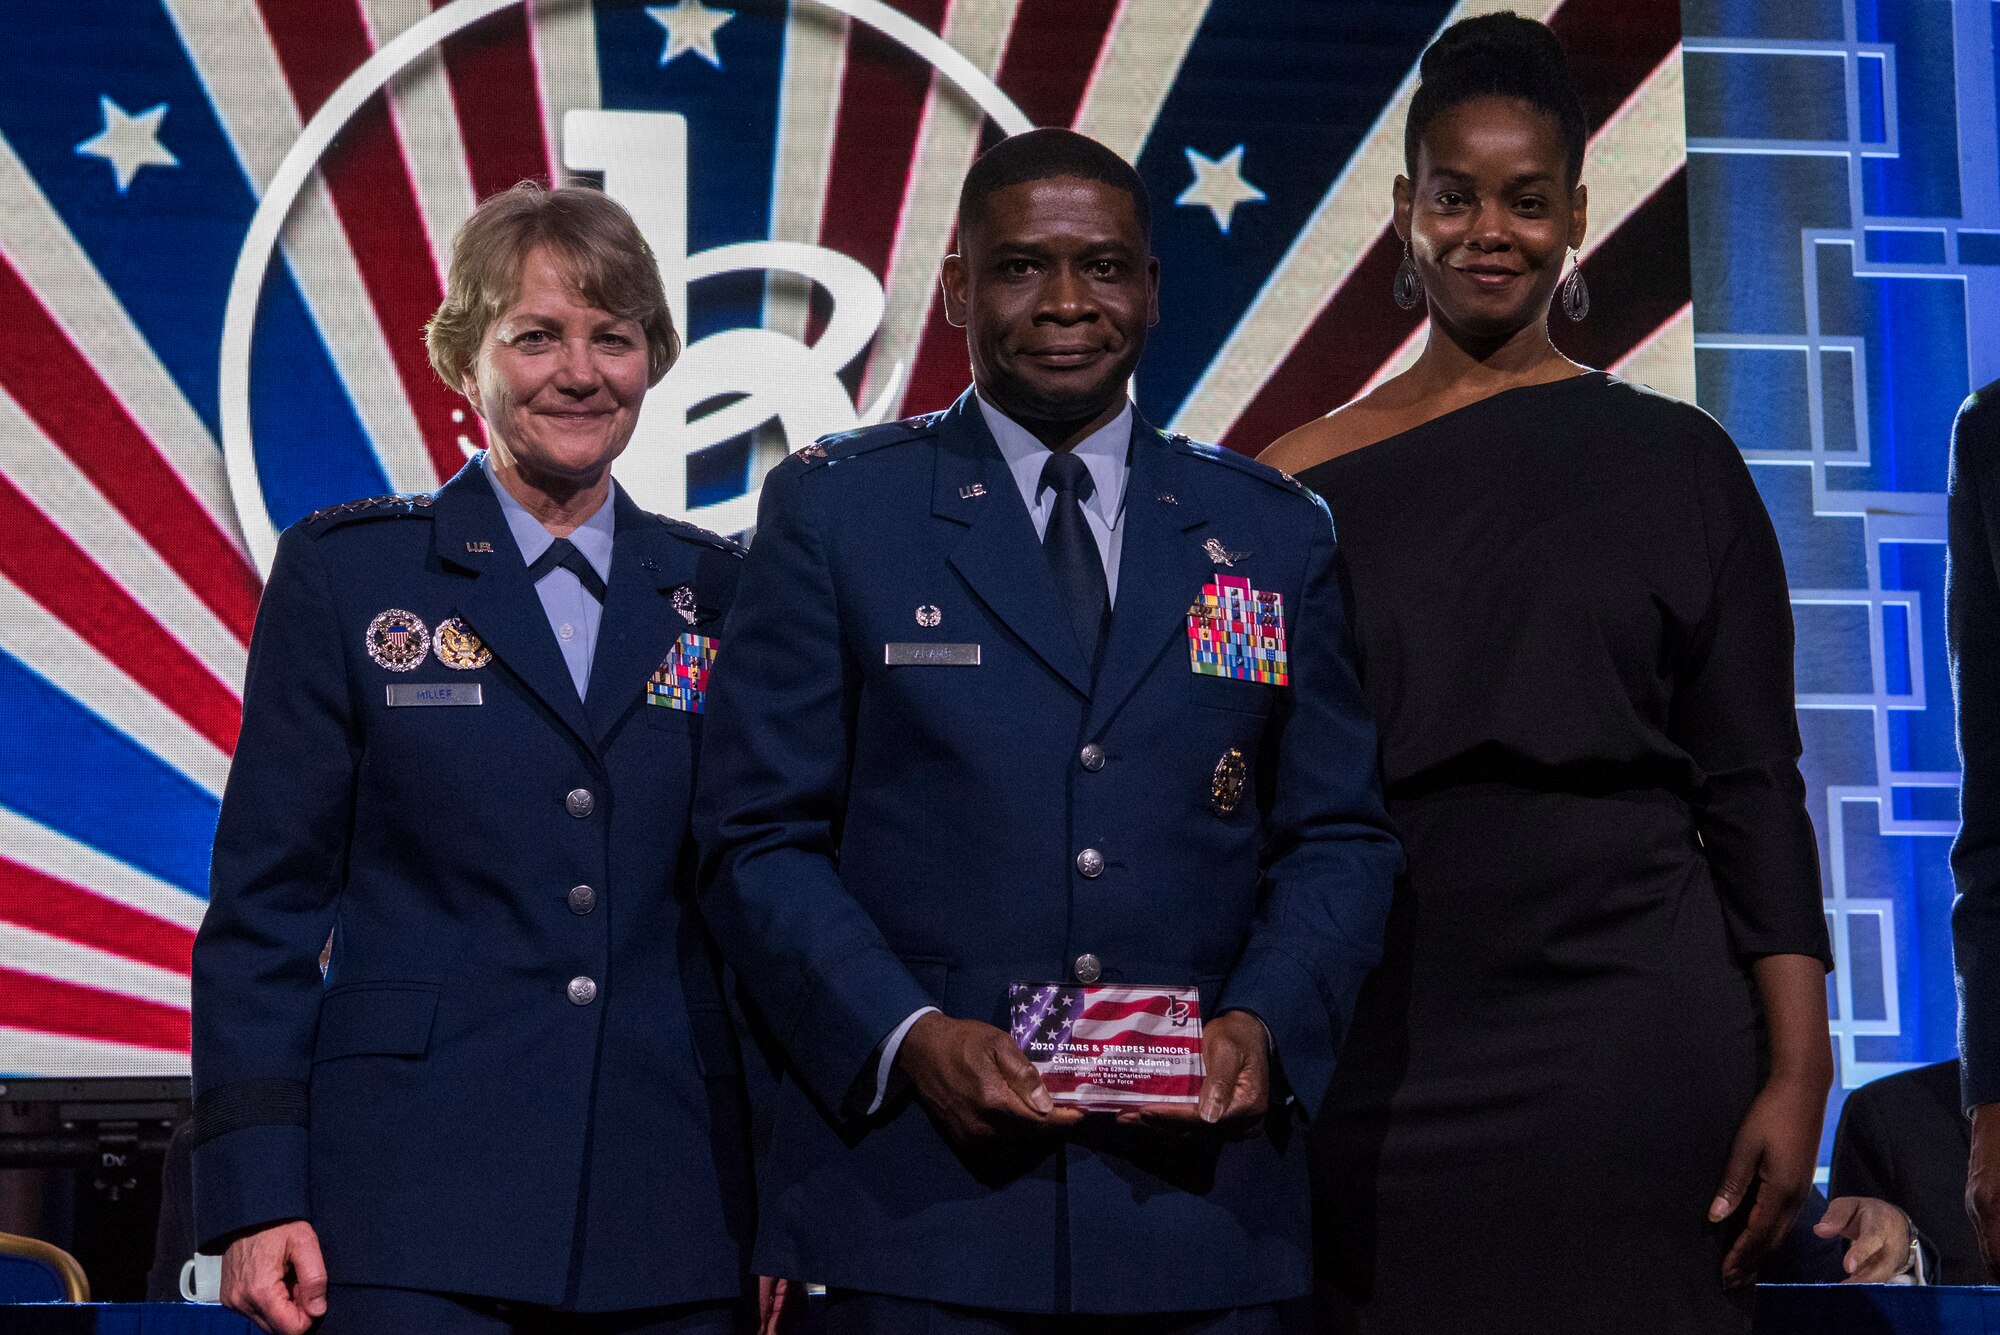 Col. Terrance A. Adams, commander of the 628th Air Base Wing and Joint Base Charleston, S.C., along with his sister, Felicia Johnson, accepted the Military Service Award from Gen. Maryanne Miller, Air Mobility Command commander, at the 2020 Black Engineer of the Year Stars and Stripes dinner, Feb. 14, 2020, Washington, D.C. Adams earned the award for his more than 14 years of service to BEYA and over 5,000 students reached. (U.S. Air Force photo by Staff Sgt. James Richardson)